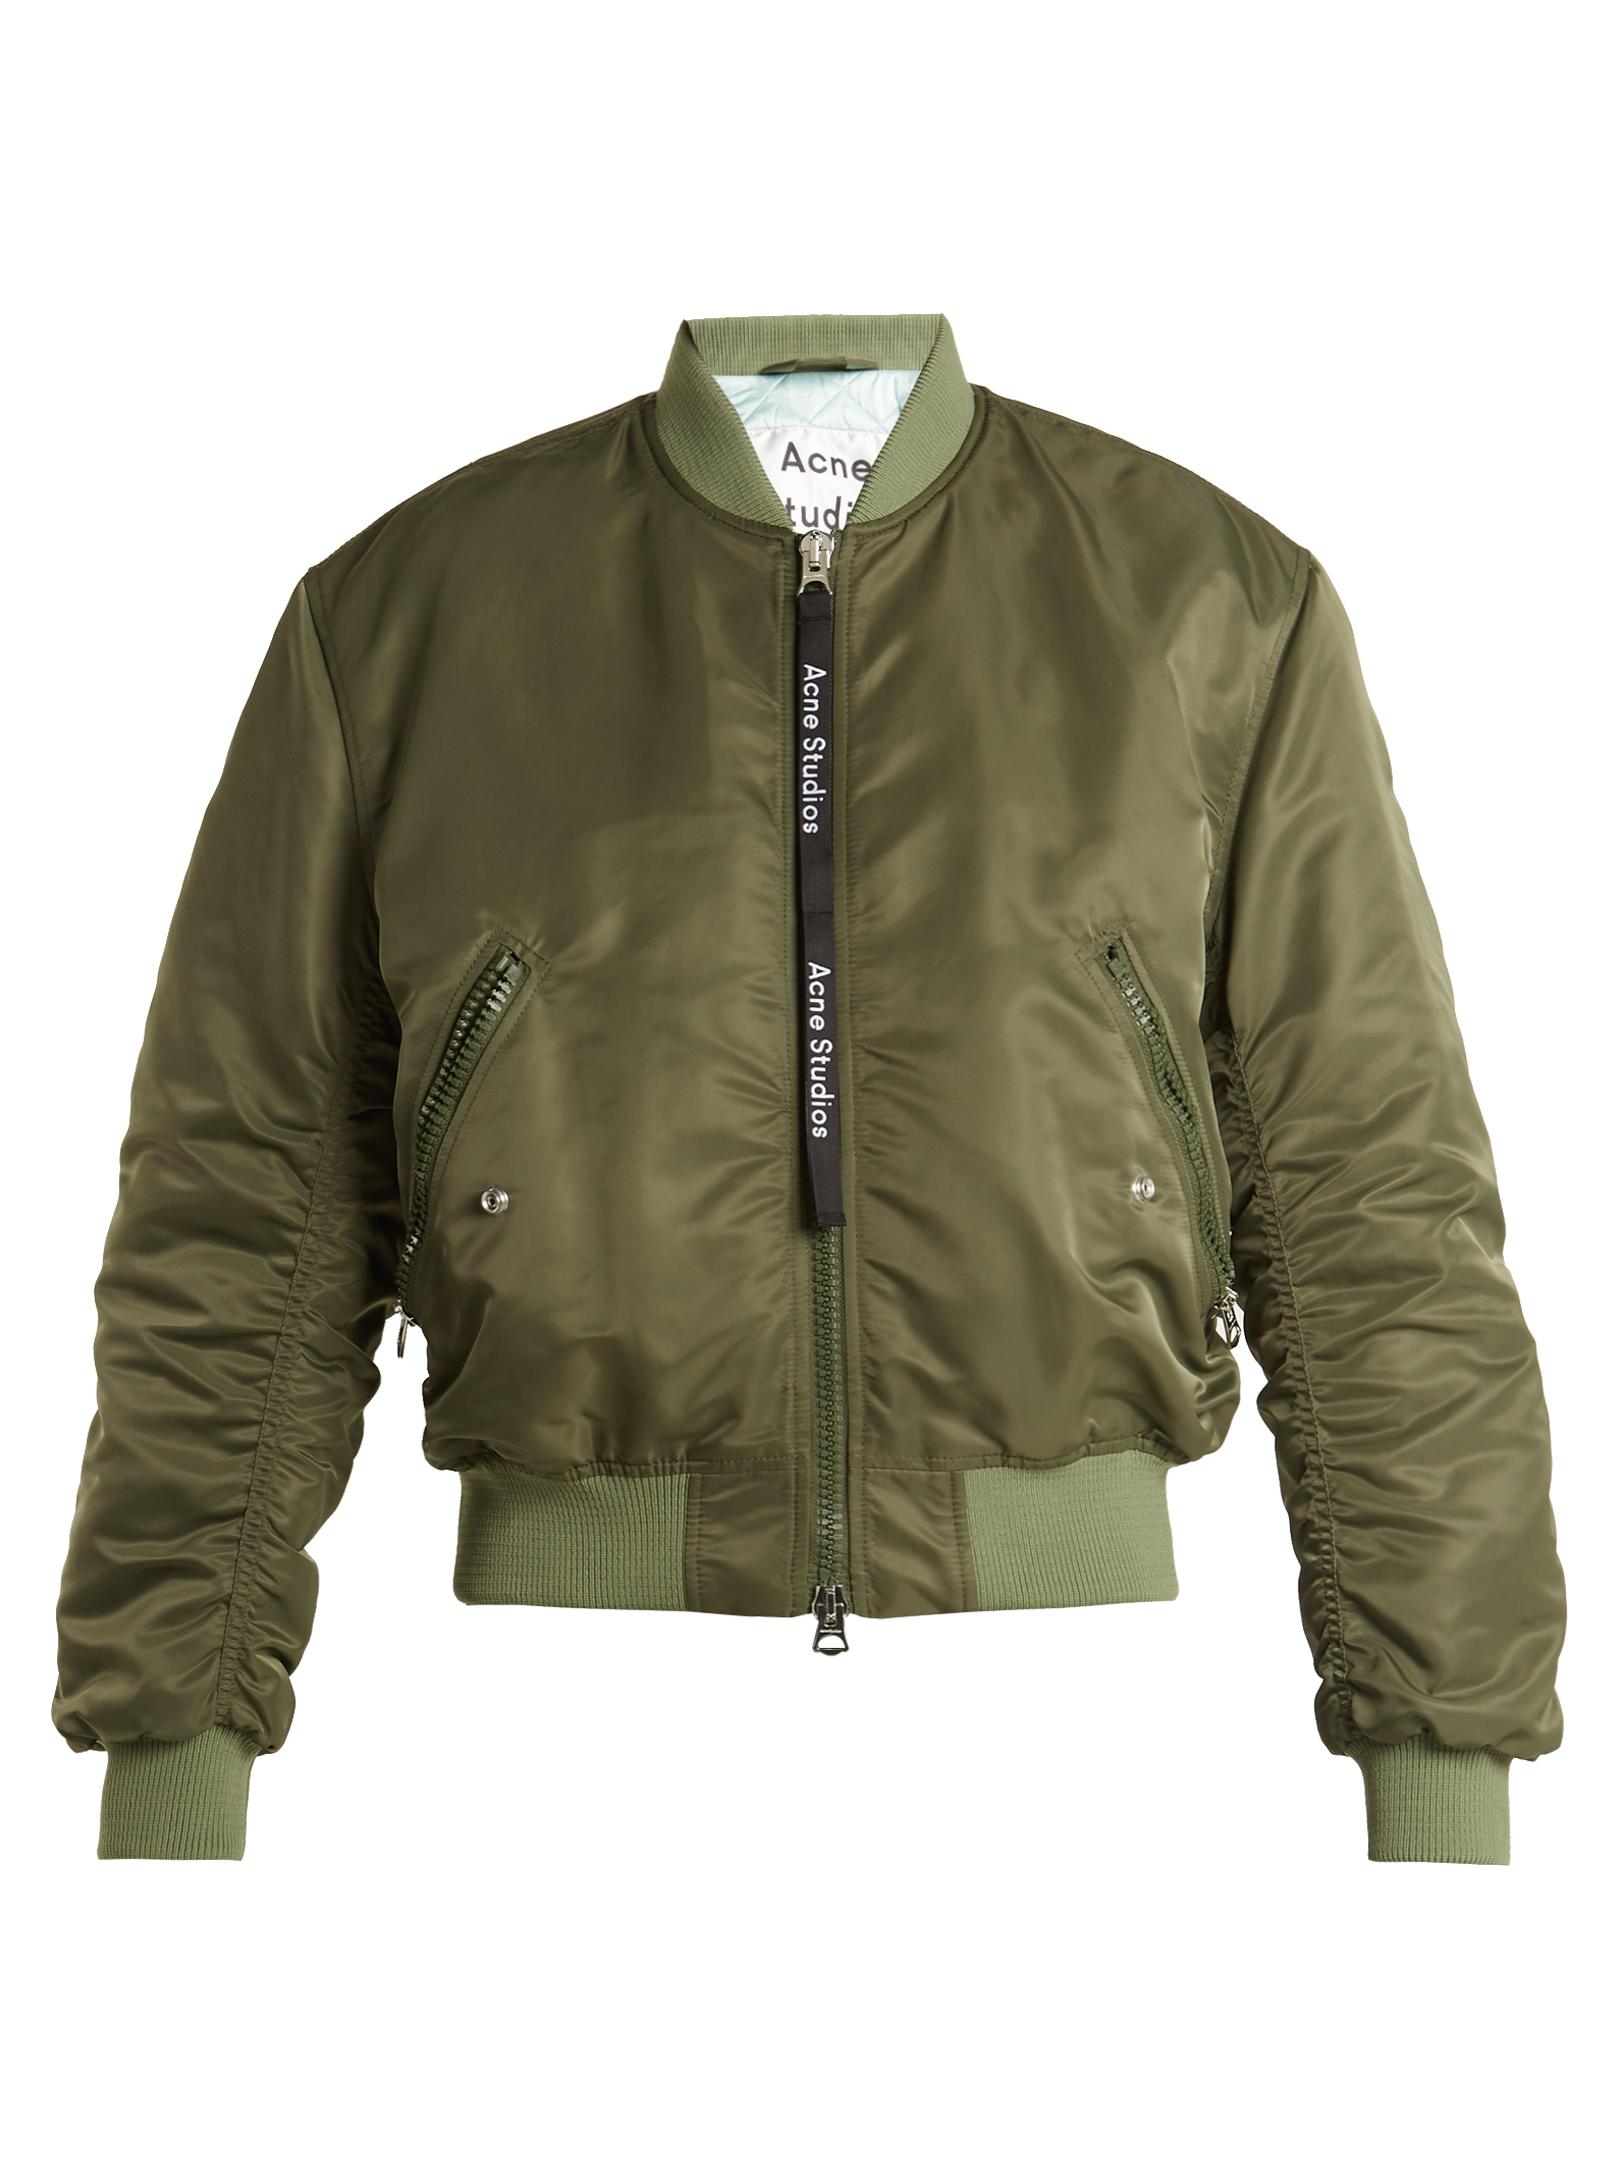 Lyst - Acne Clea Padded Bomber Jacket in Green